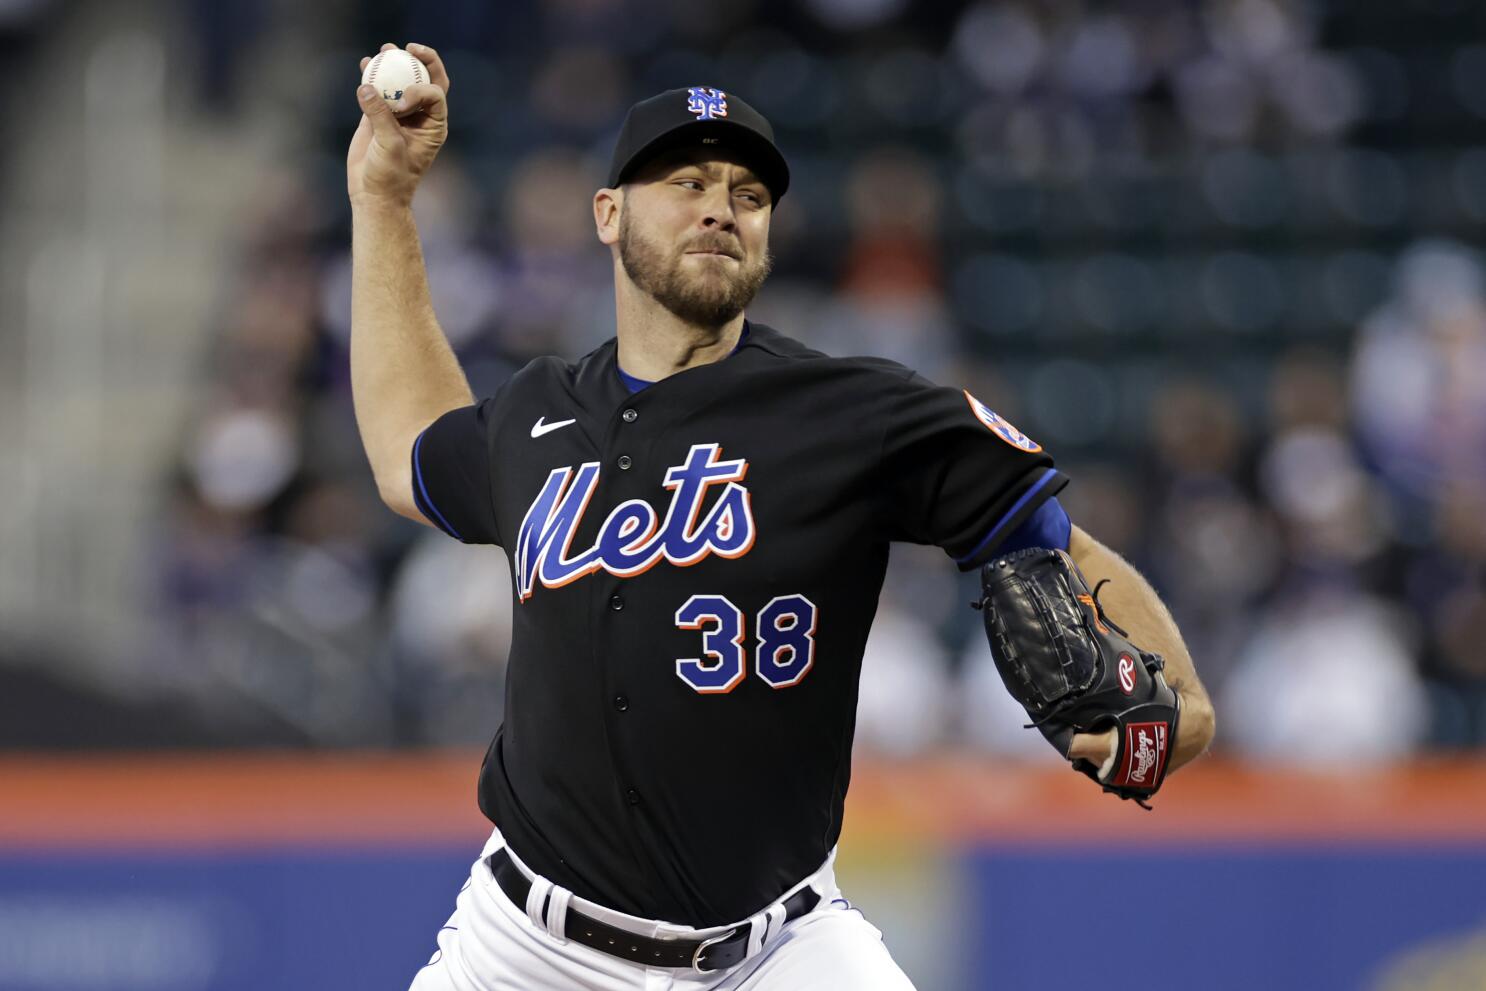 Five Mets pitchers combine for no-hitter in win over Phillies